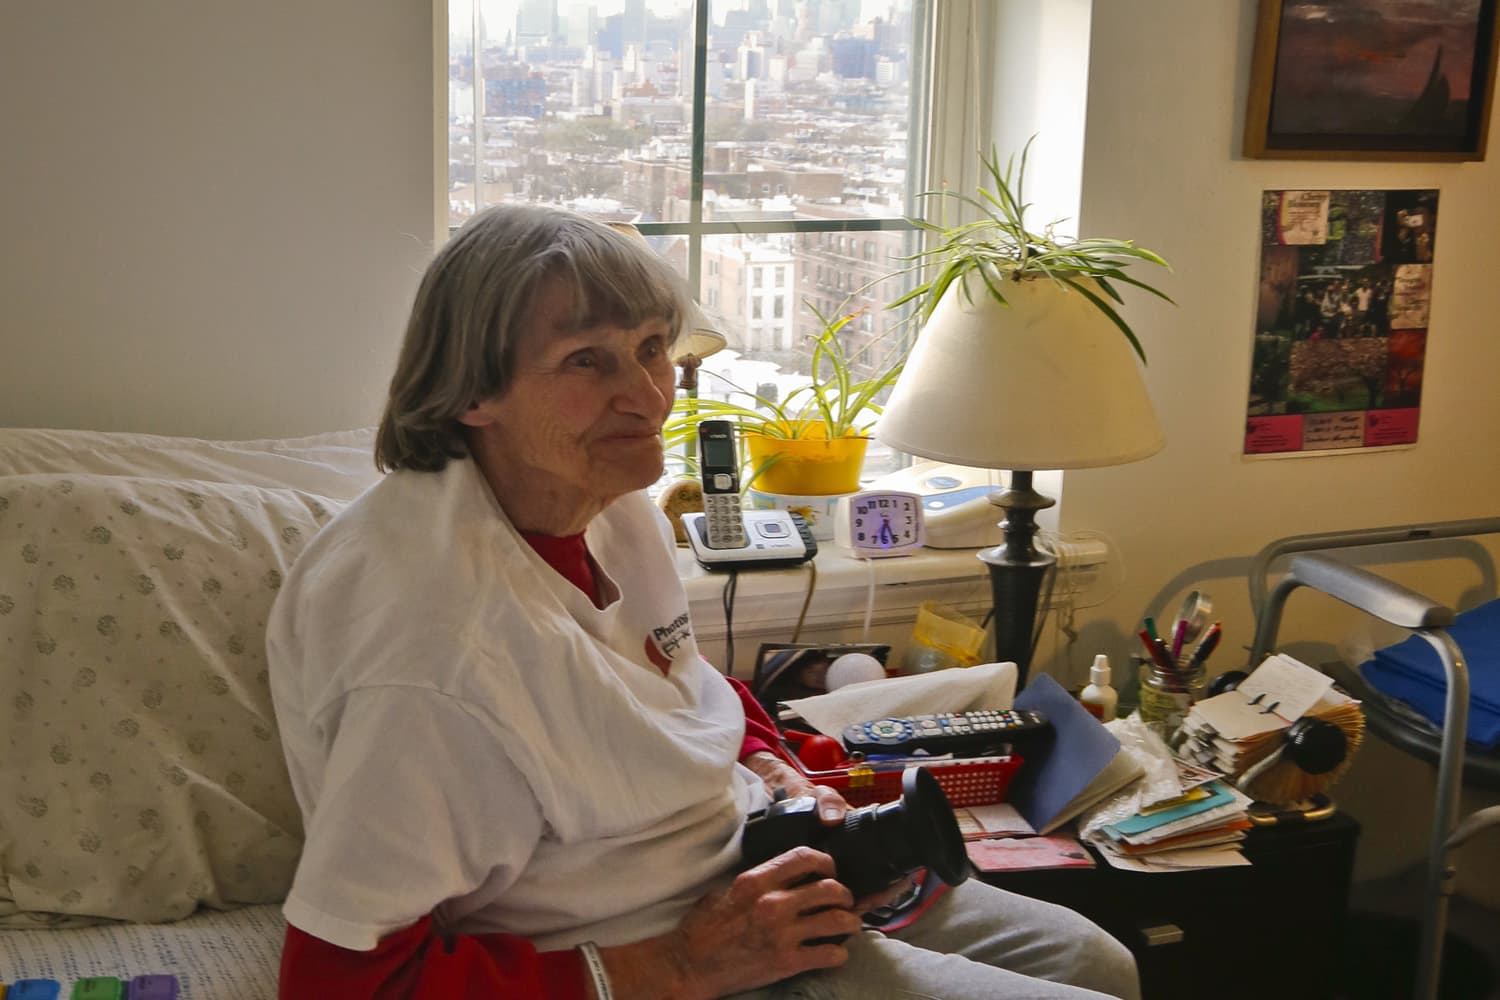 Annemarie Mogil sits in her bedroom holding the camera she uses to make photographs from her window at the Prospect Park Residence, an assisted living apartment complex for seniors, in Brooklyn, N.Y. (Bebeto Matthews/AP)